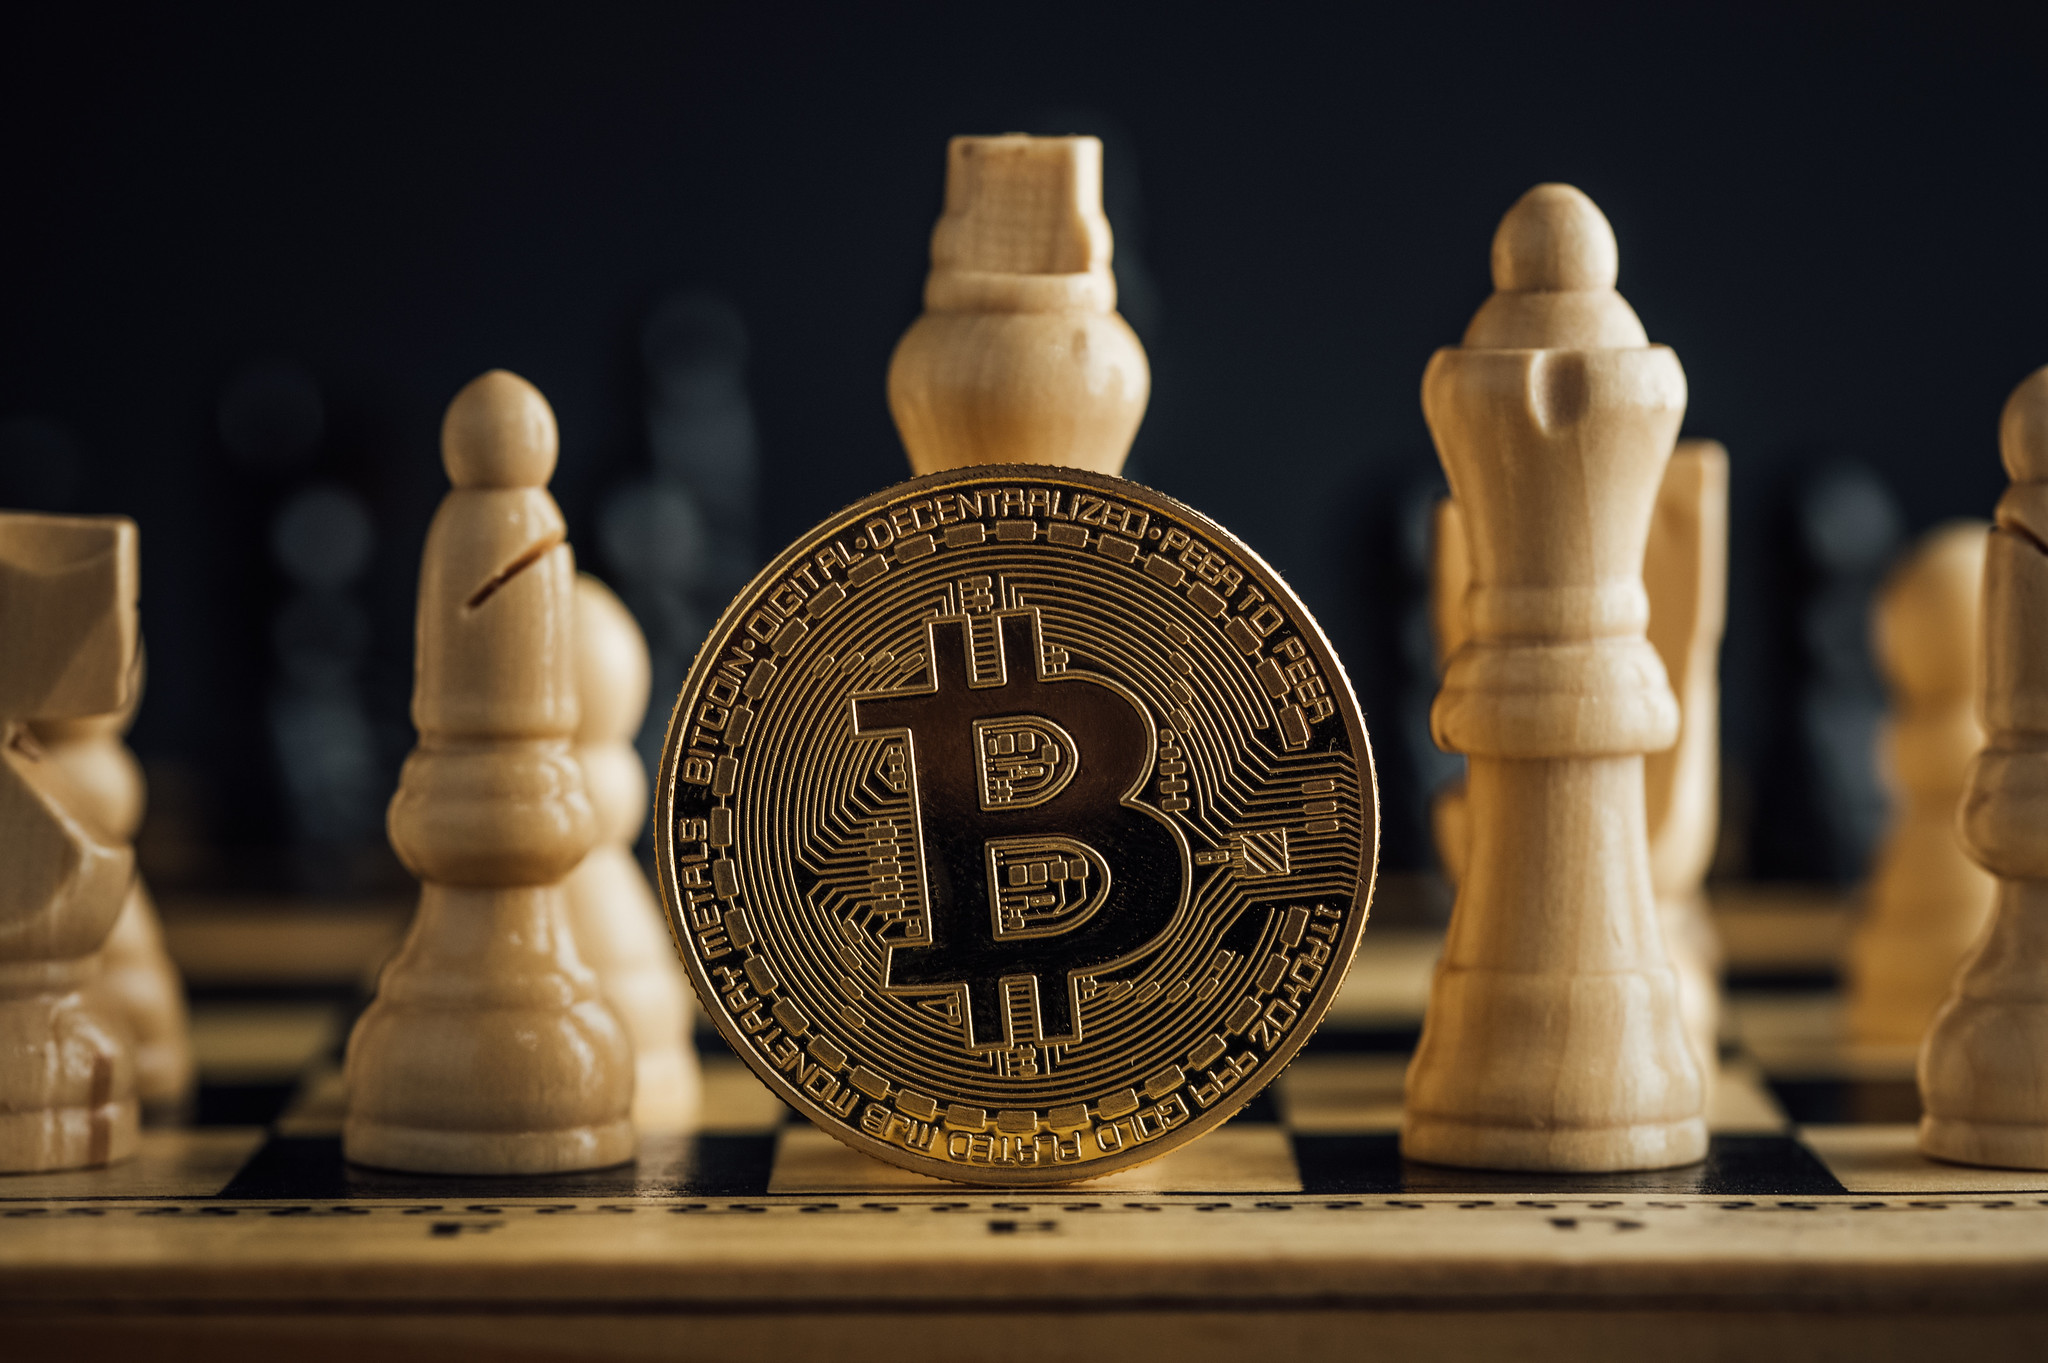 Michael Saylor Reveals The Time He Thought Bitcoin Was Like 'Online Gambling'